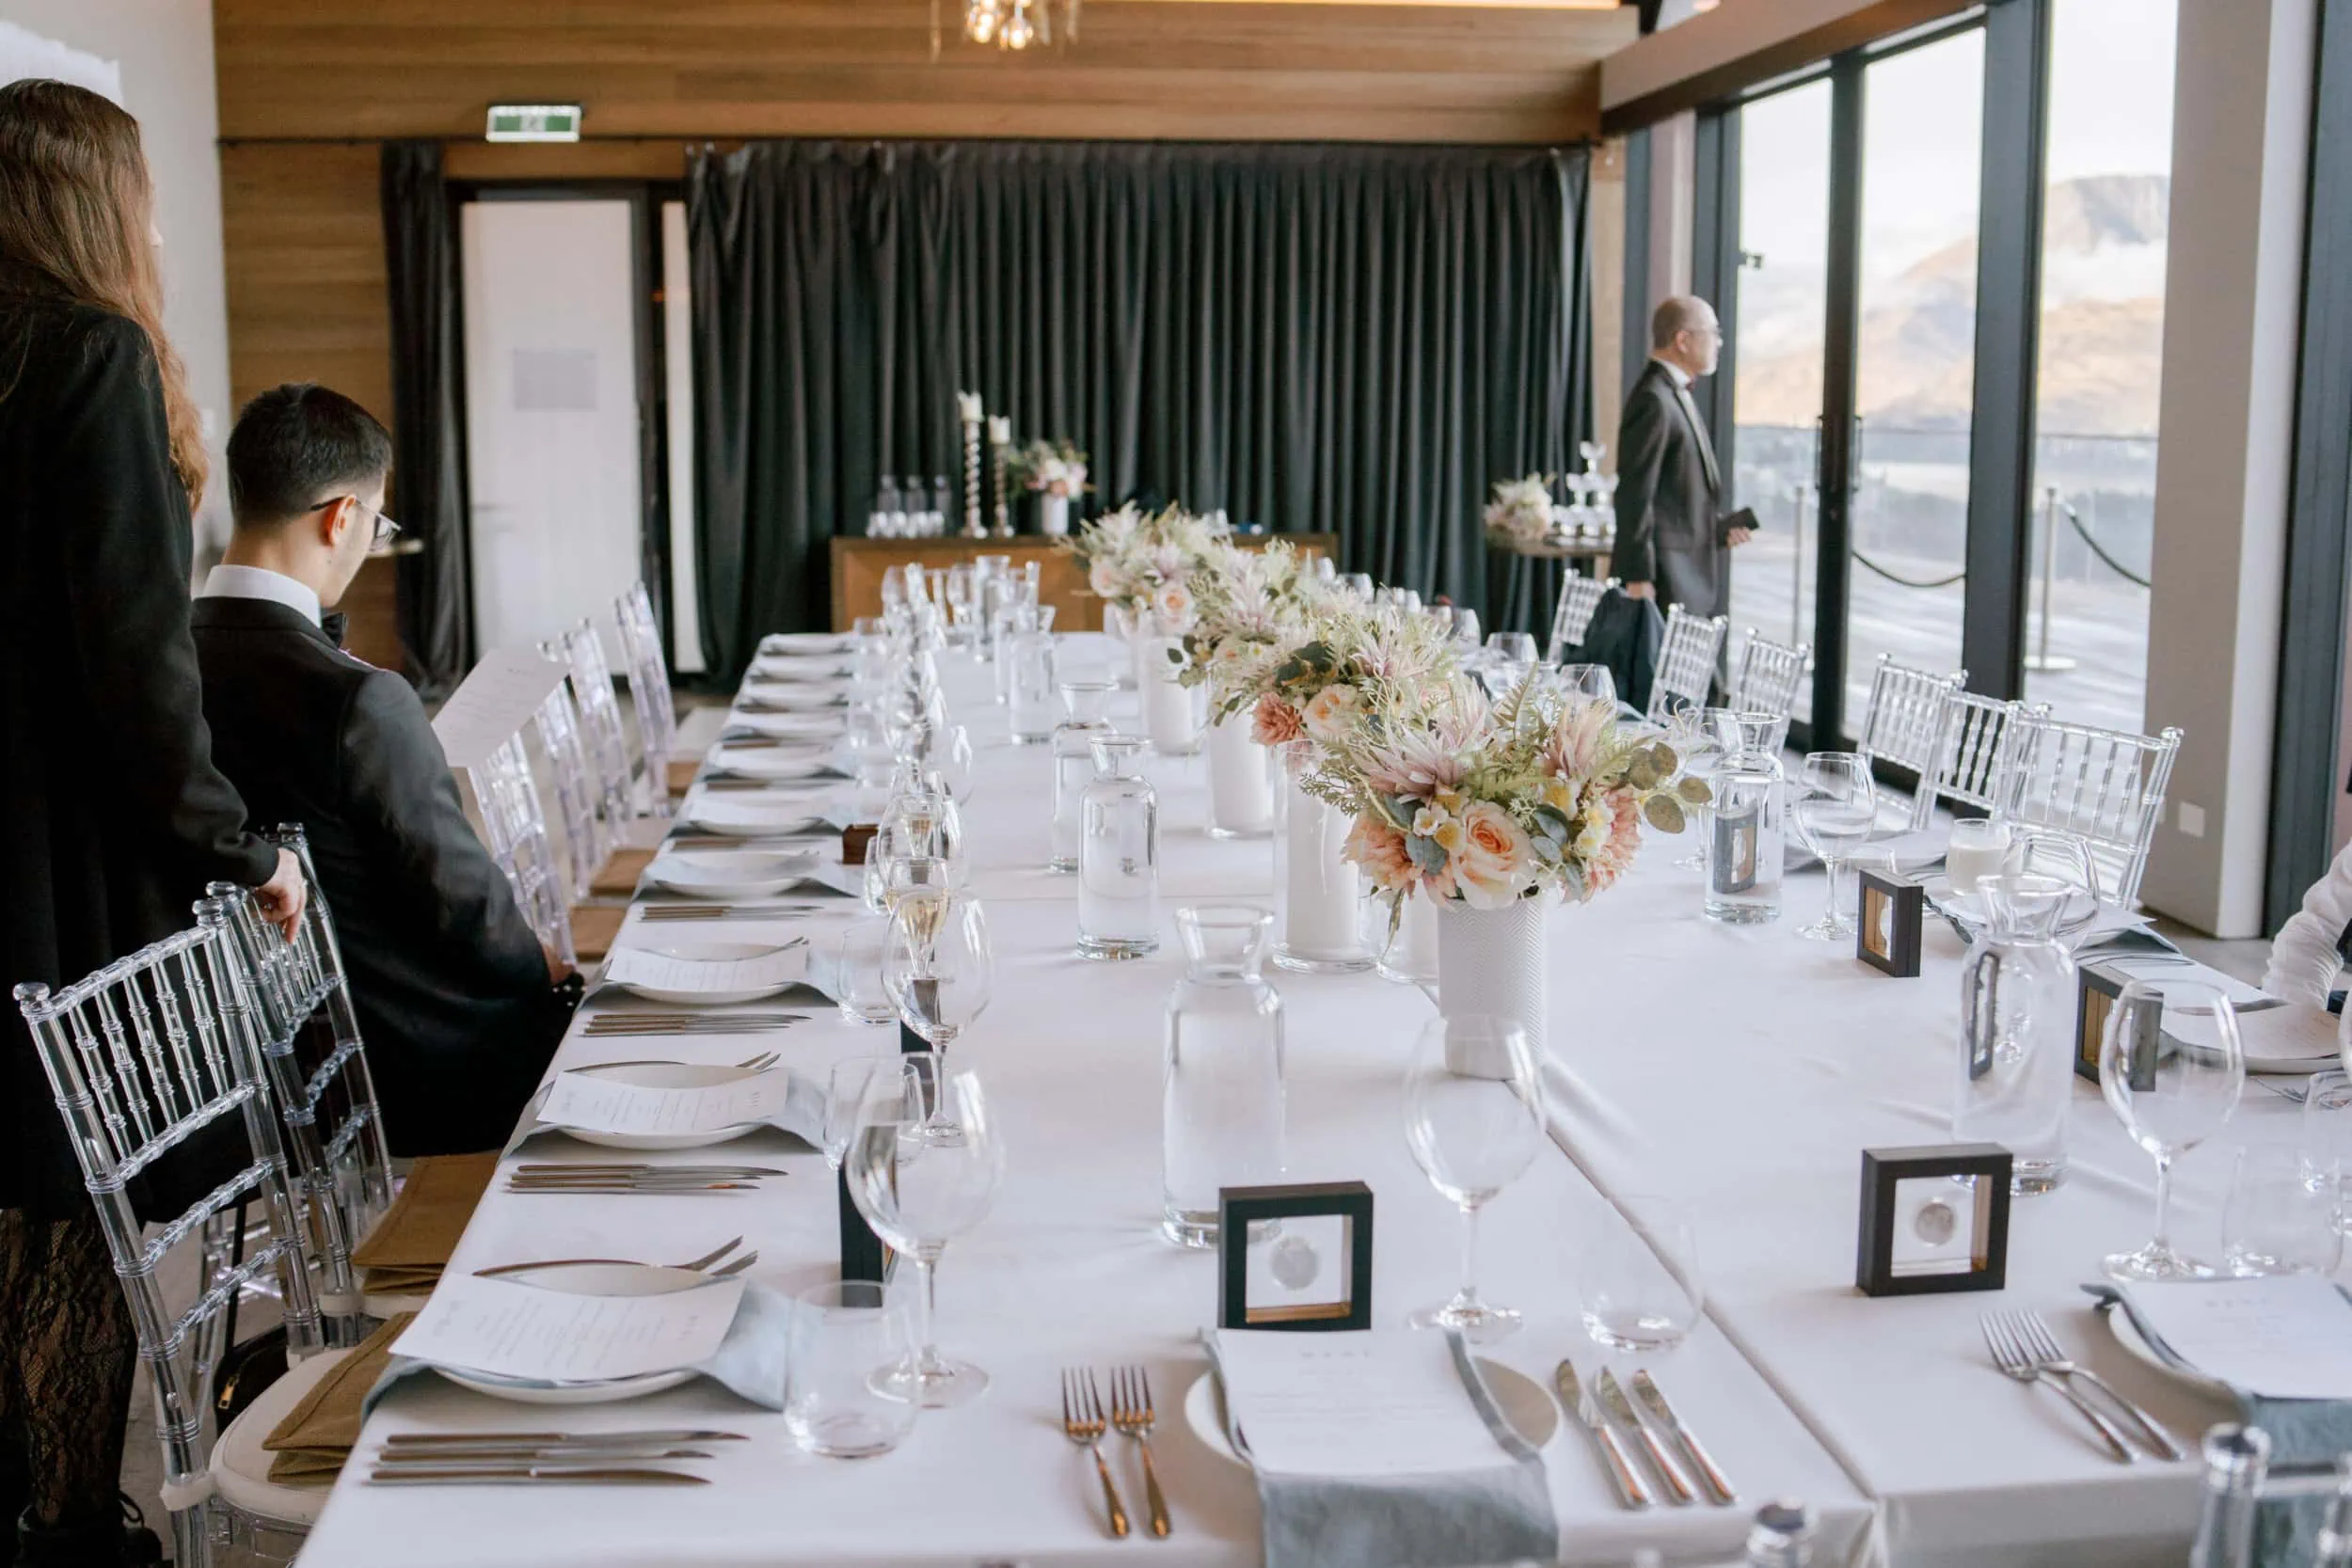 Queenstown New Zealand Elopement Wedding Photographer - A Lam and Wendy's wedding reception table set up in a room with large windows at Kamana Lakehouse.